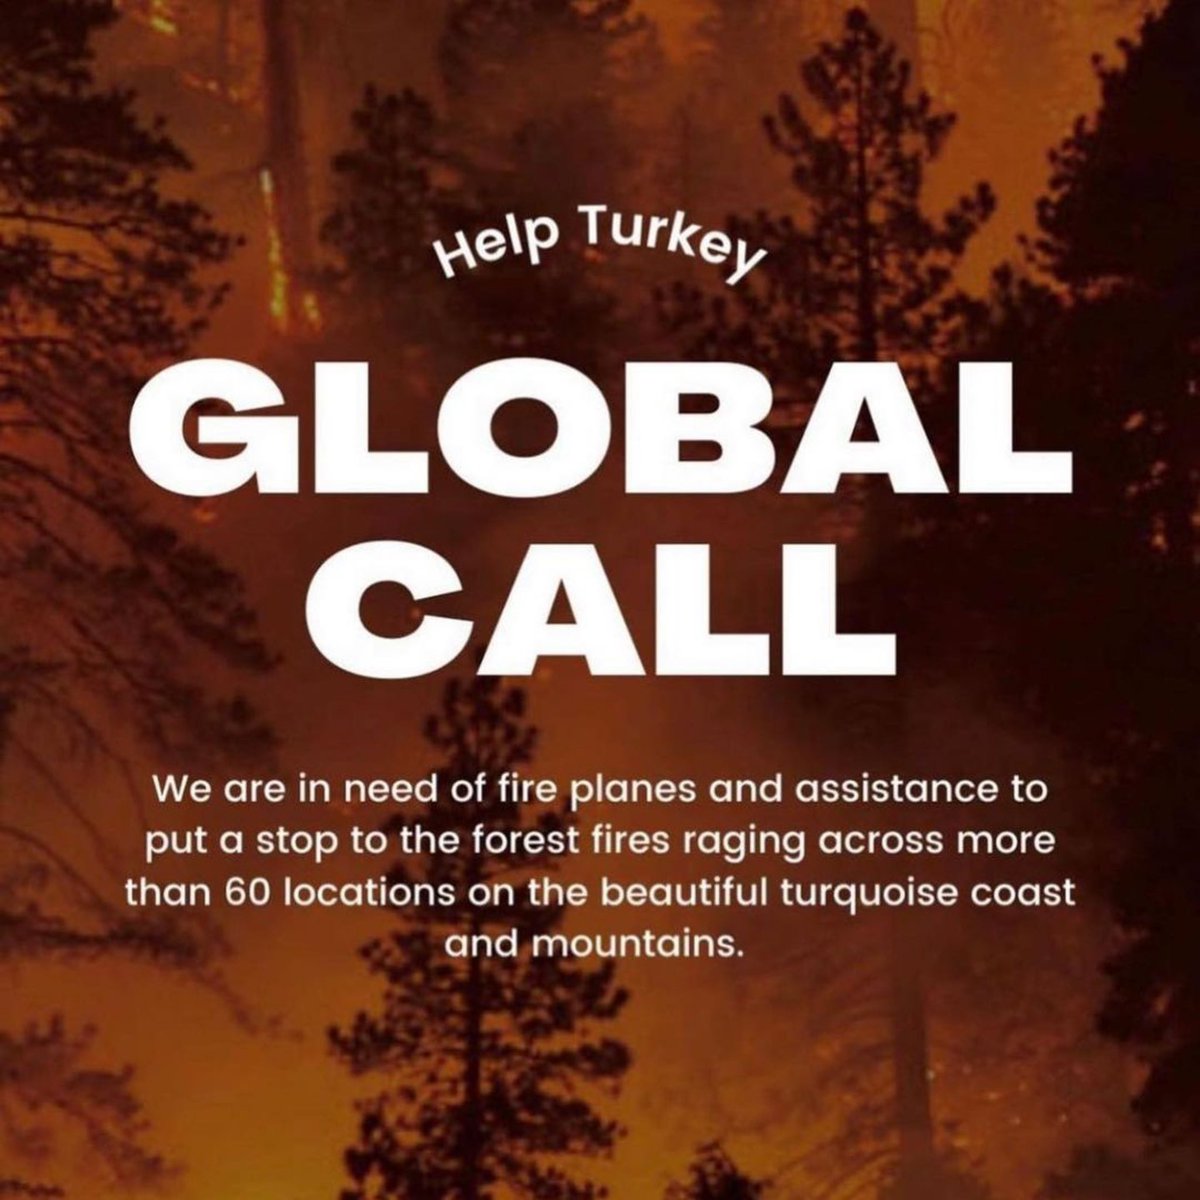 🚨I am calling all the countries who can help us. We are perished and devastated with the total 112 fires. The ones that we can’t stop are still going so strong. We dont have enough fire fighting planes to stop it. We lost 8 people, so many animals and our forests. #helpturkey